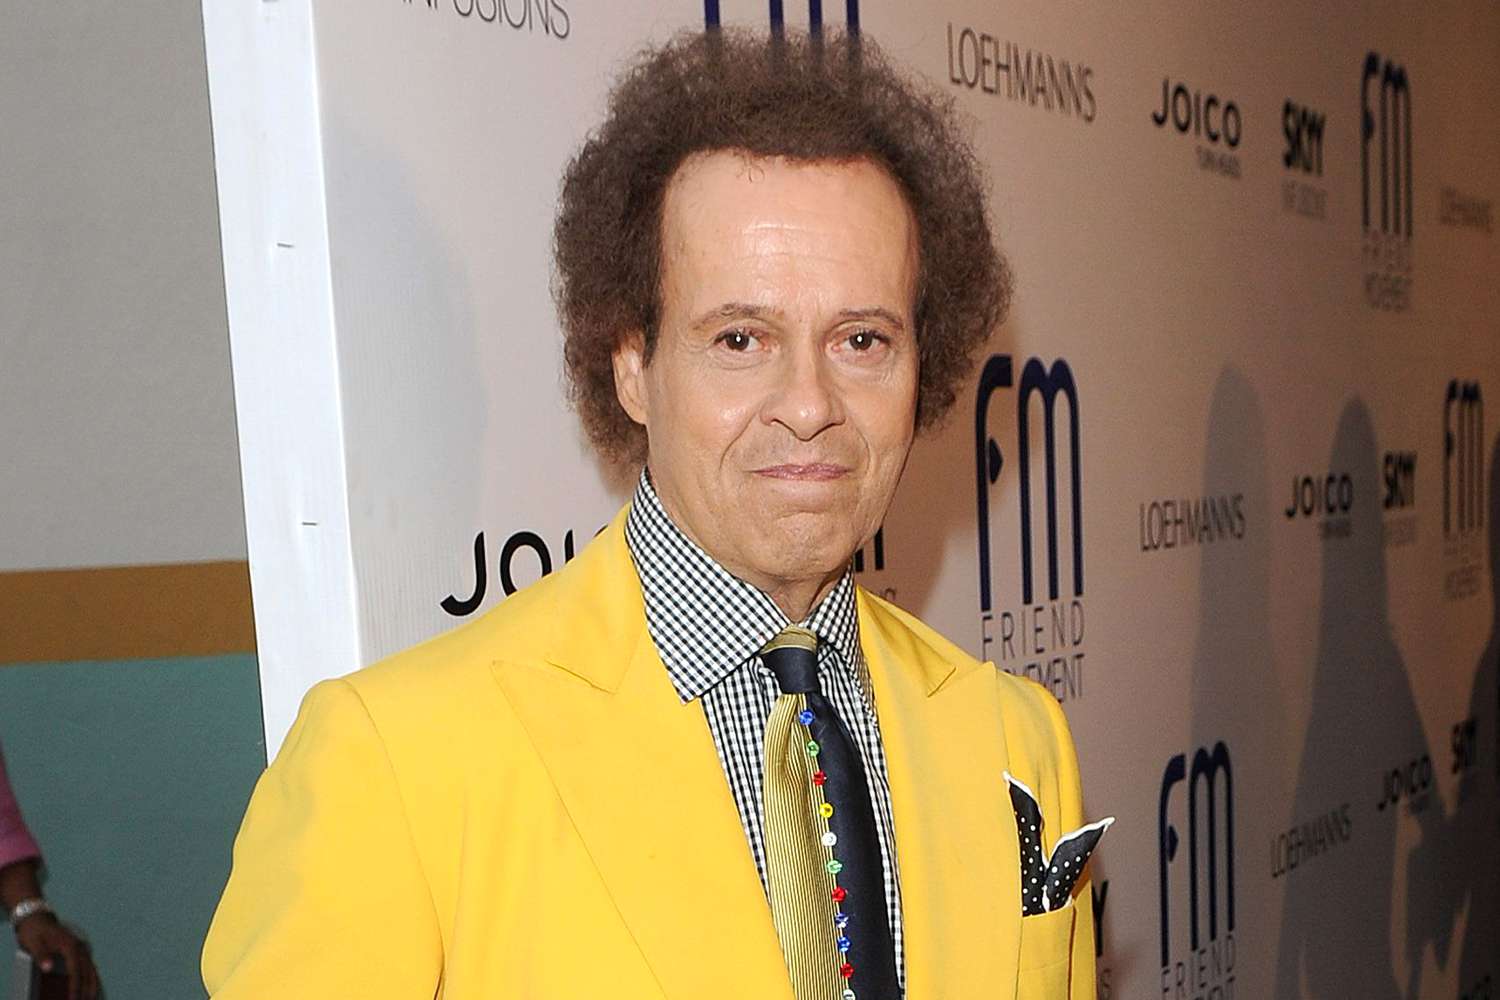 Richard Simmons Laid to Rest in Private Funeral with Close Friends and Family